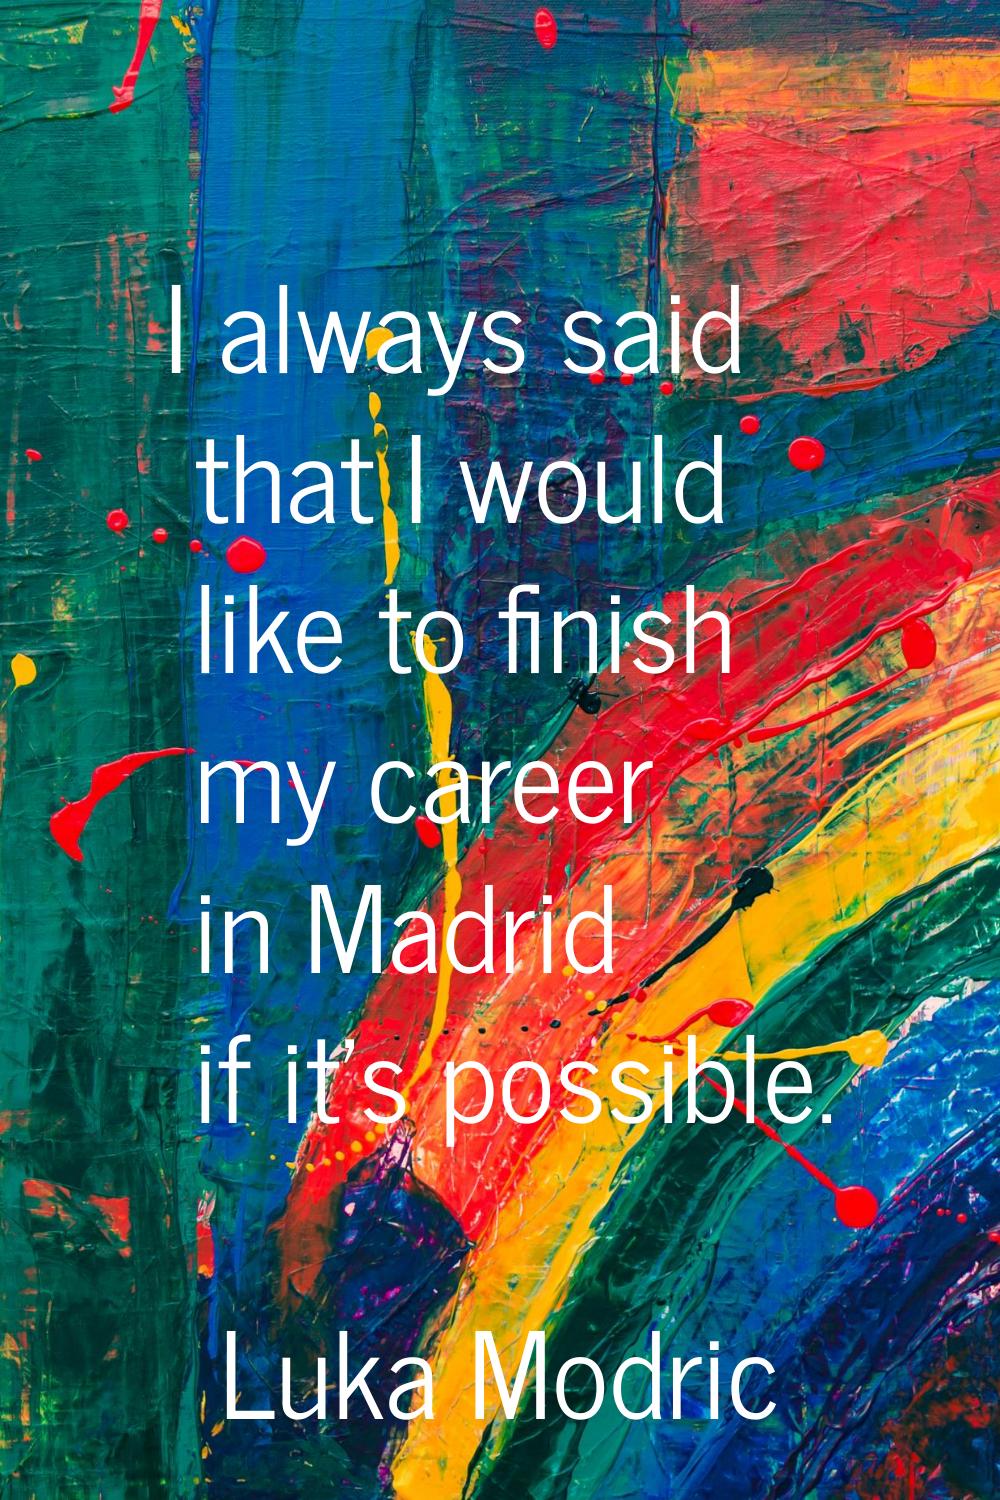 I always said that I would like to finish my career in Madrid if it's possible.